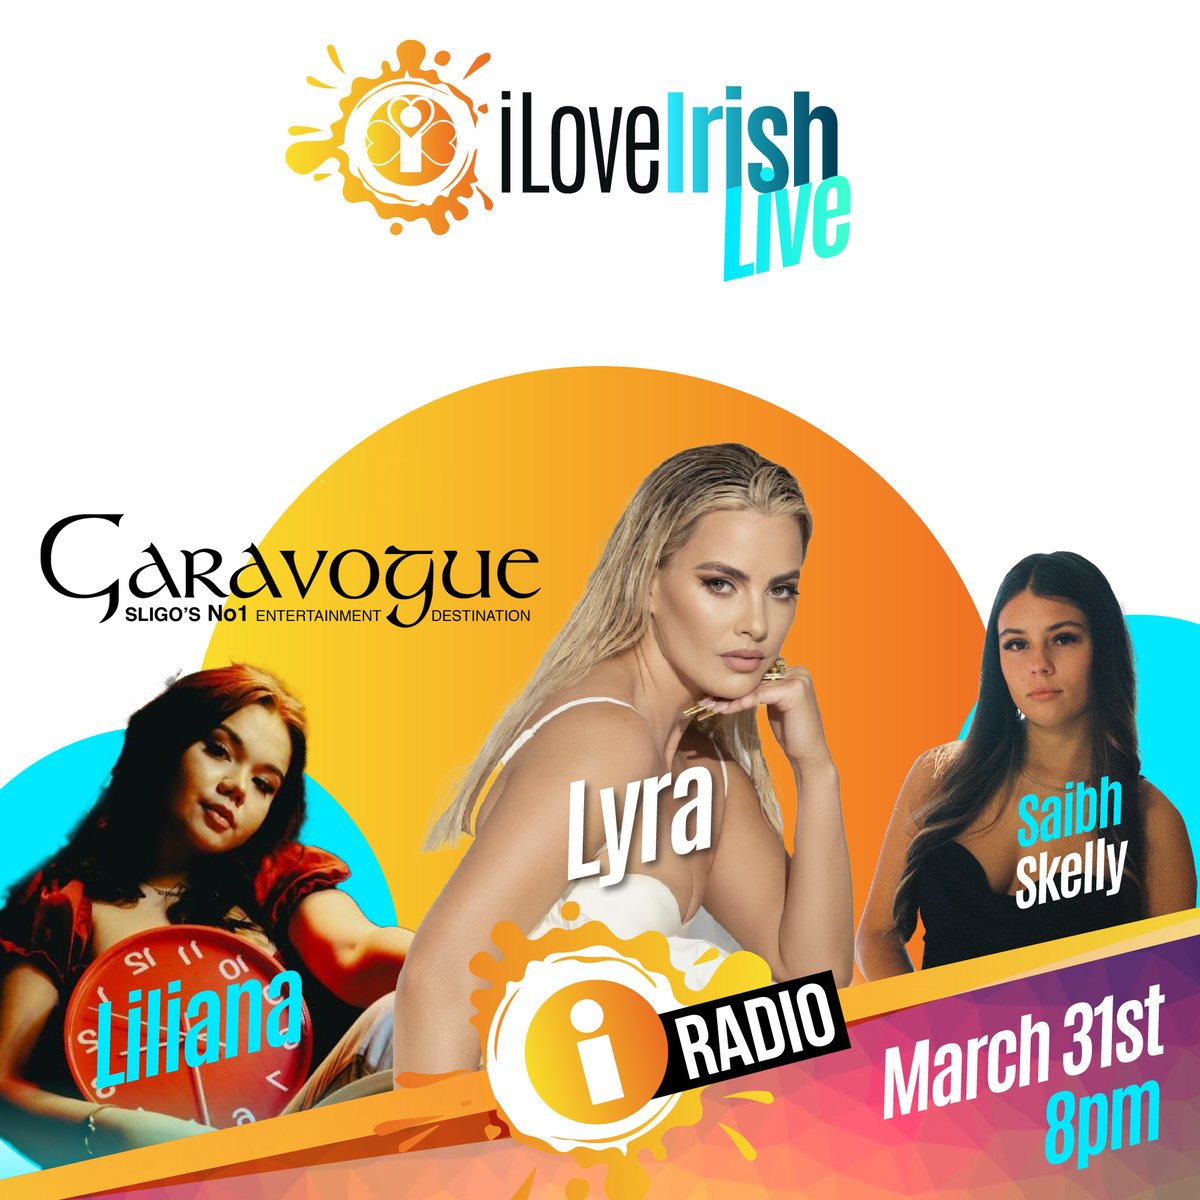 iLoveIrish Live is BACK and we're bringing @thisislyra to the @garavoguebar Sligo on March 31st. 🇮🇪 🎶

Support on the night from @saibhskelly1, @lilianamusic_ and a DJ set from our very own @louiseclarkeradio.

Keep listening to get on that guestlist!